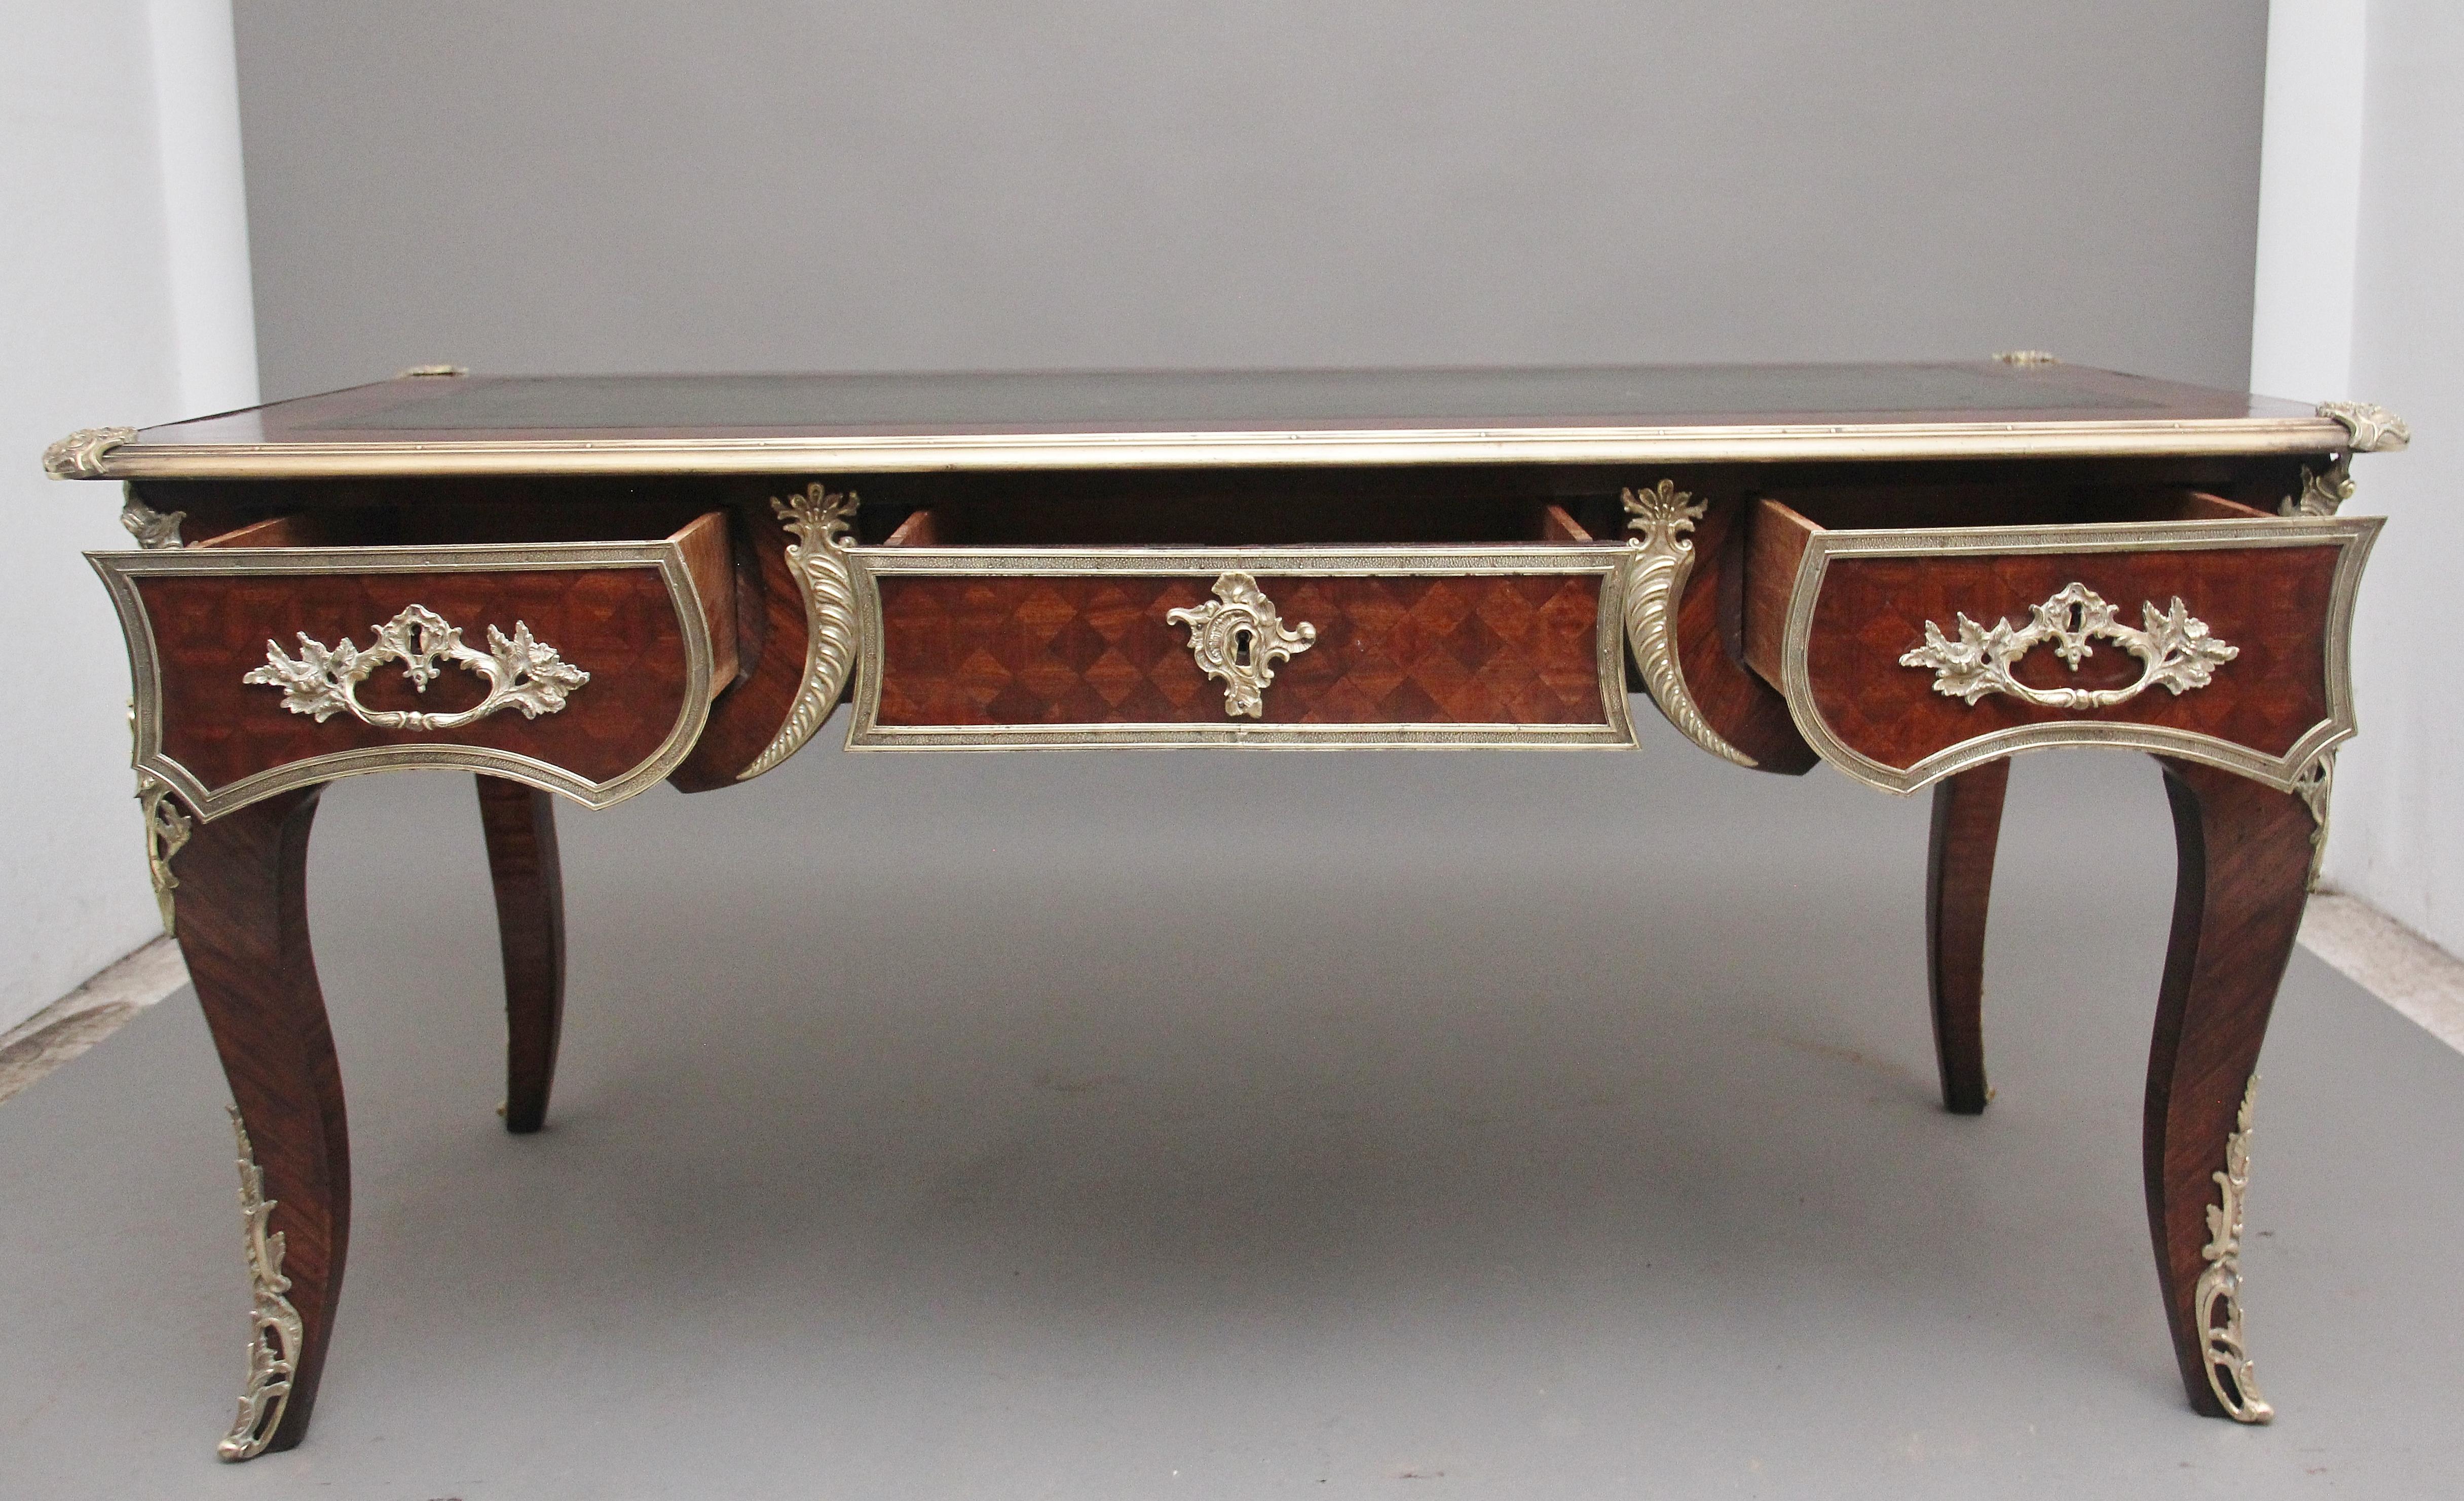 A superb quality large 19th century French Kingwood and ormolu mounted bureau-plat desk, having a rectangular shaped top with an ormolu moulded edge, decorative shell engraved corner mounts, kingwood cross banding around the edge and a green leather